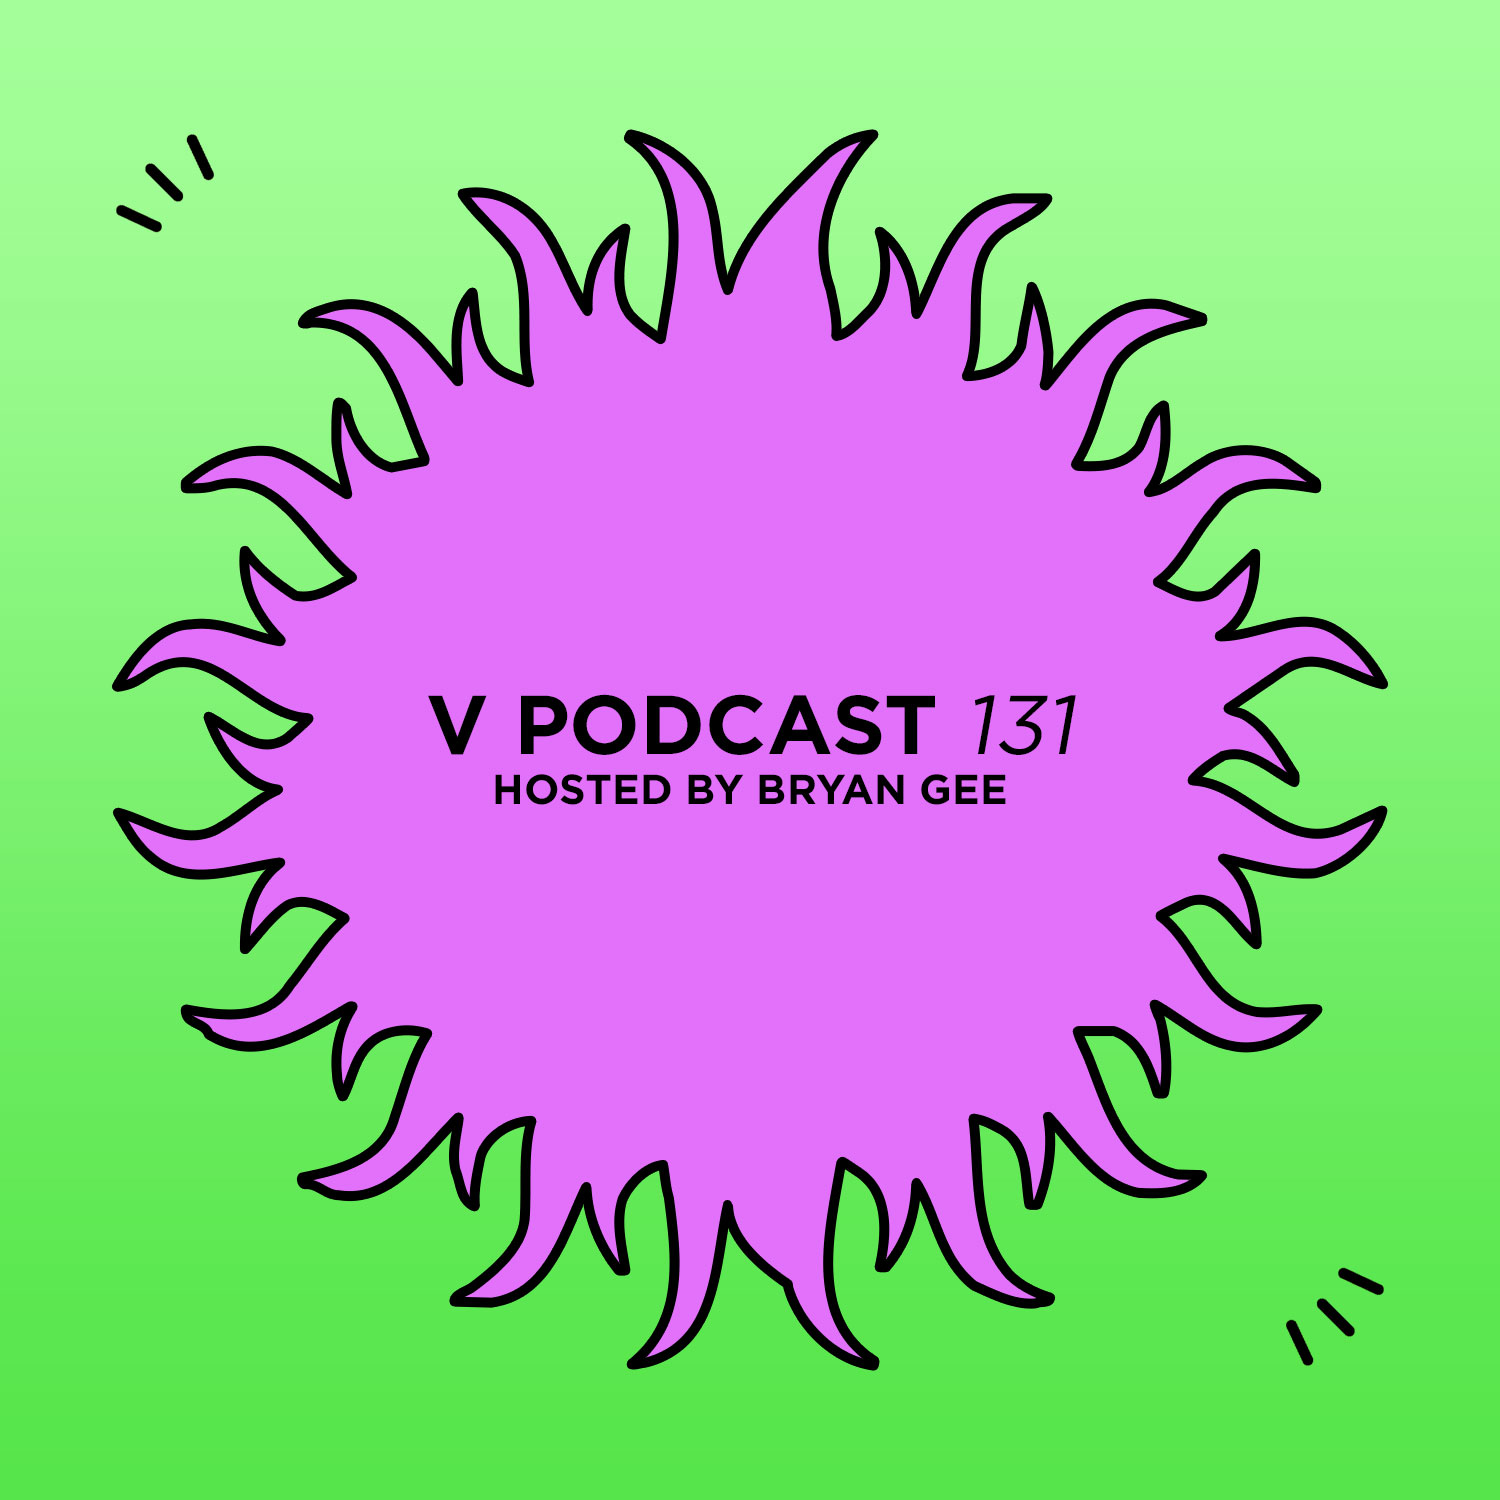 V Podcast 131 - Hosted by Bryan Gee Artwork